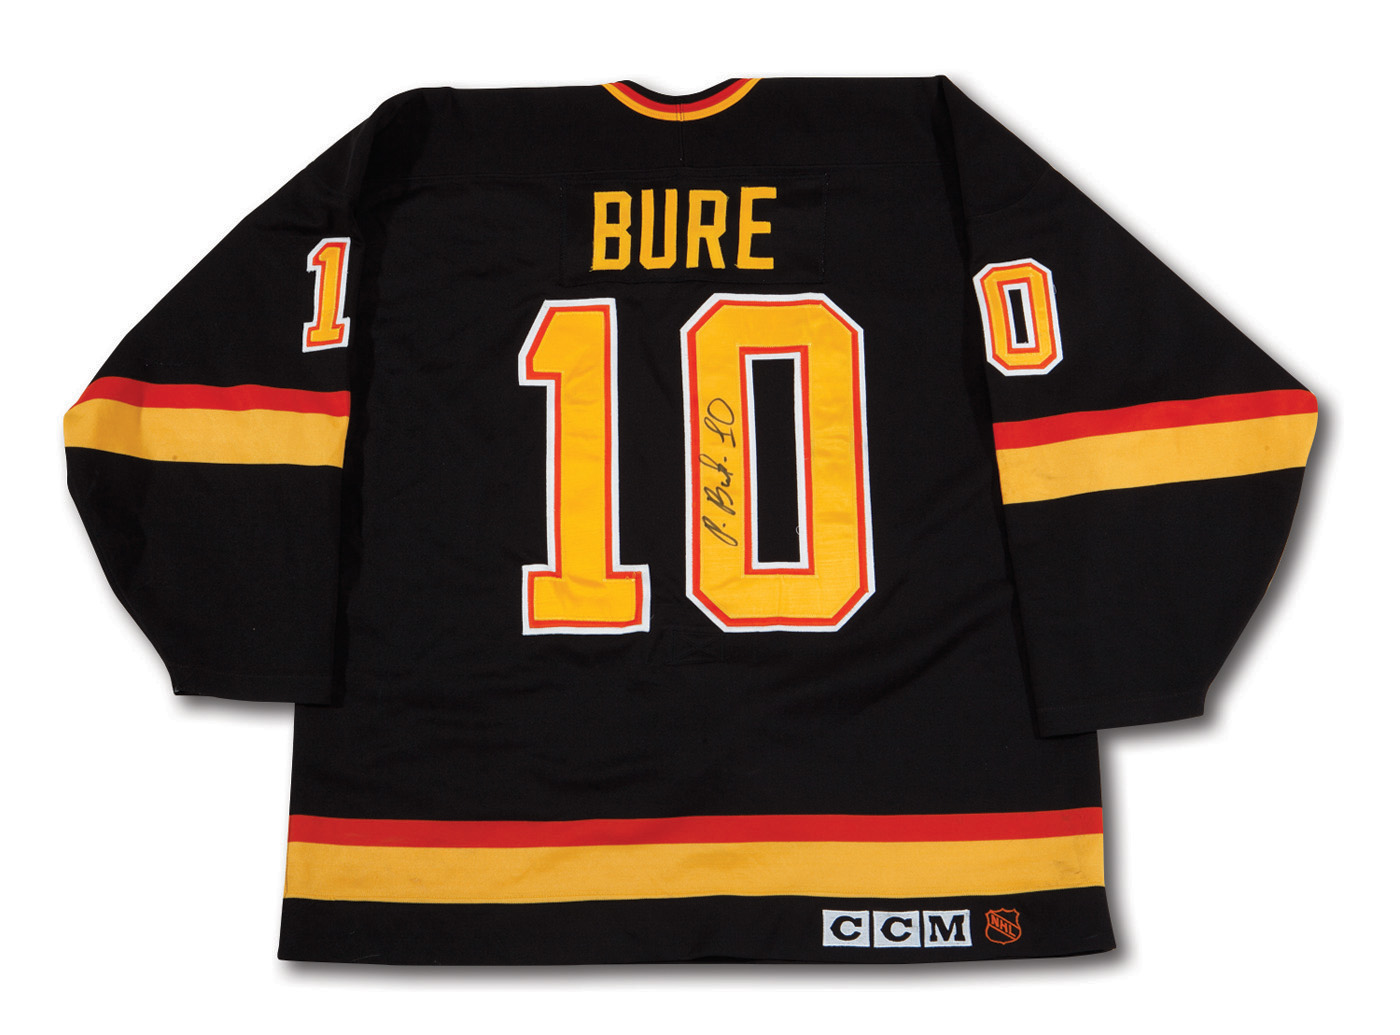 Canuck's Pavel Bure Jersey